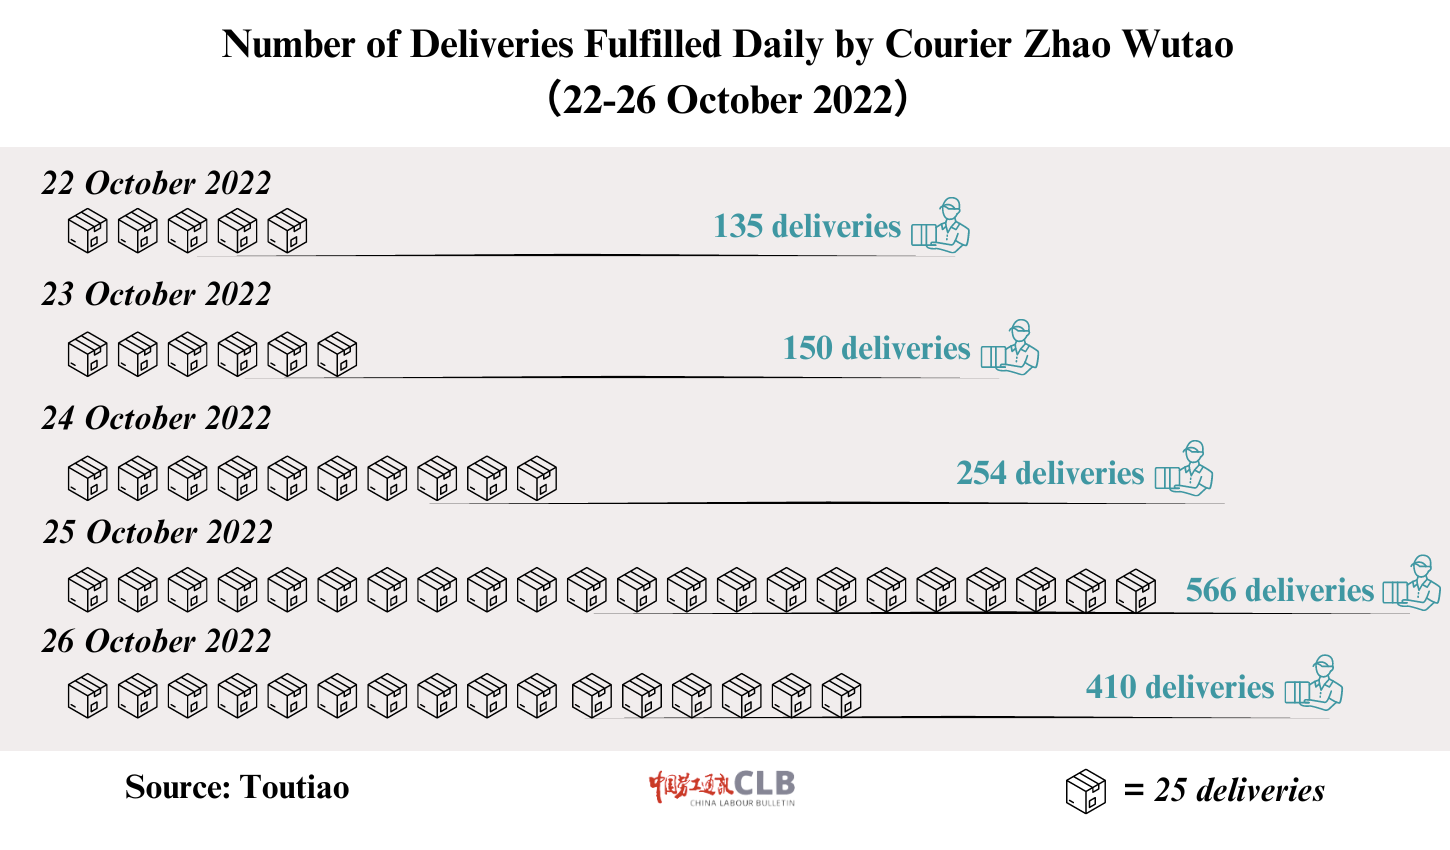 A CLB graphic shows that Zhao's work deliveries tripled from 22 October to 25 October